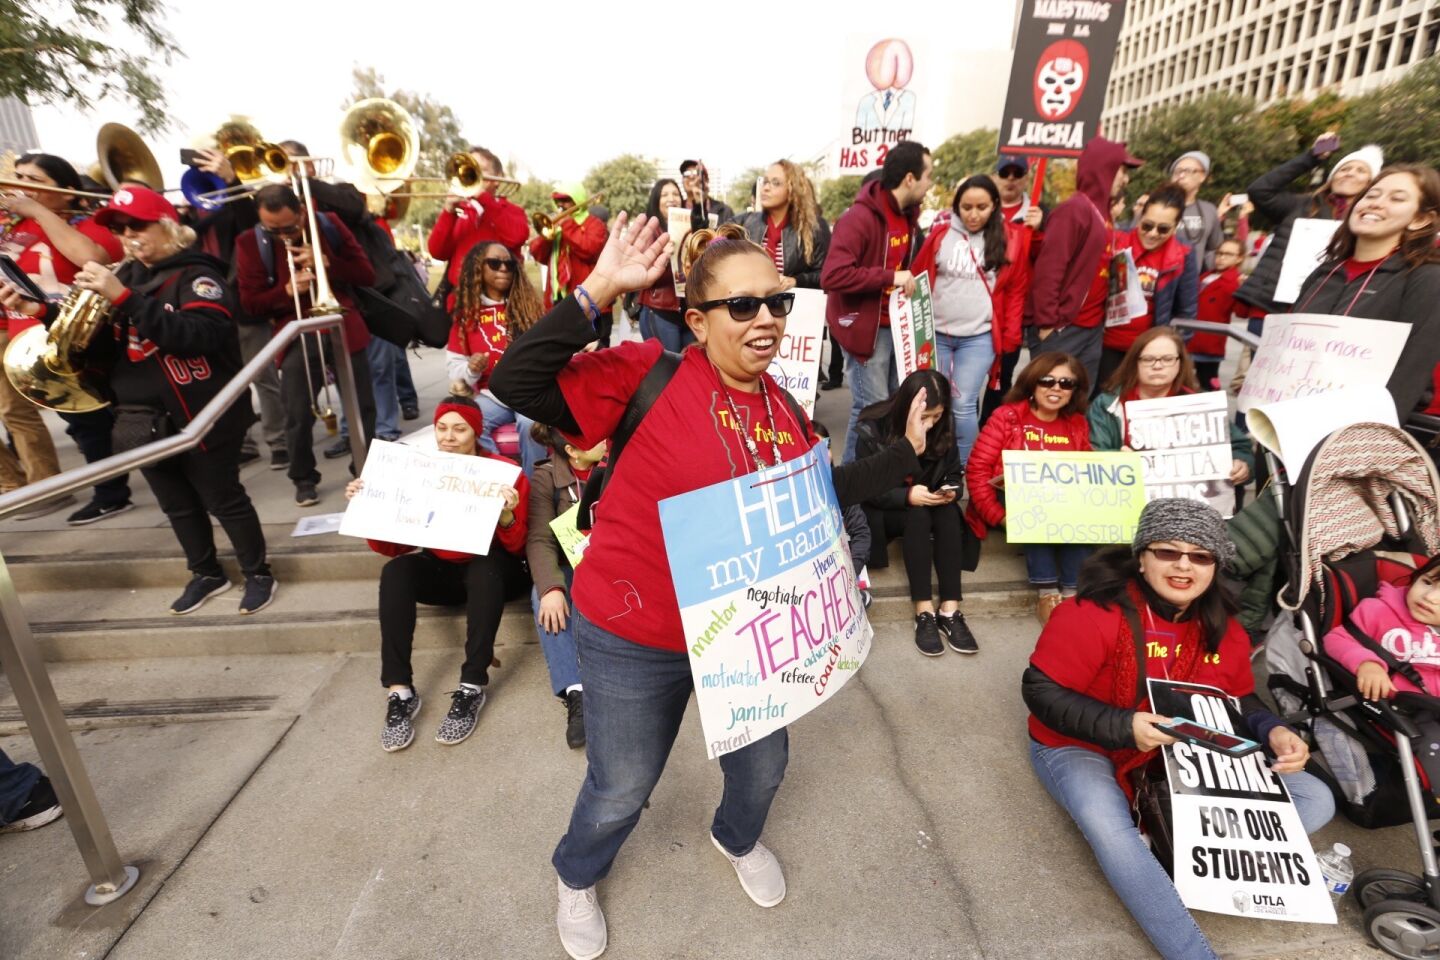 Kimberly Barrera, a 6th grade teacher, joins fellow teachers preparing for a rally in Grand Park in front of Los Angeles City Hall Friday.